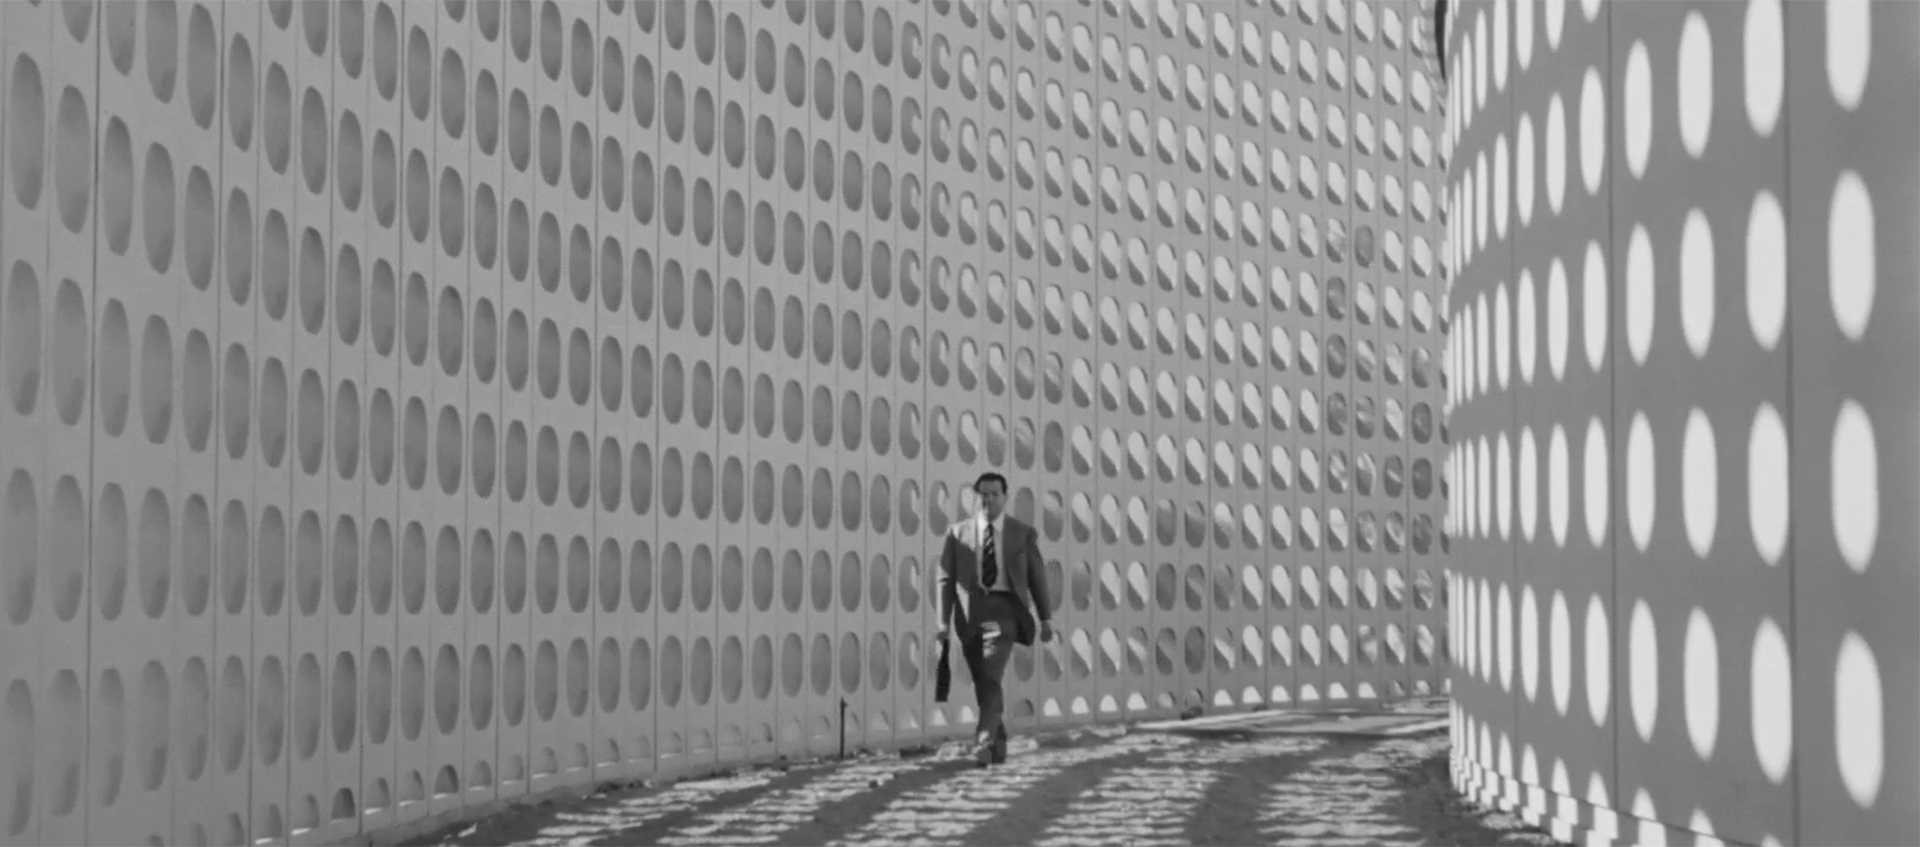 A man in a suit is walking in a corridor, one wall has lots of holes that are creating shadows on the opposite wall.